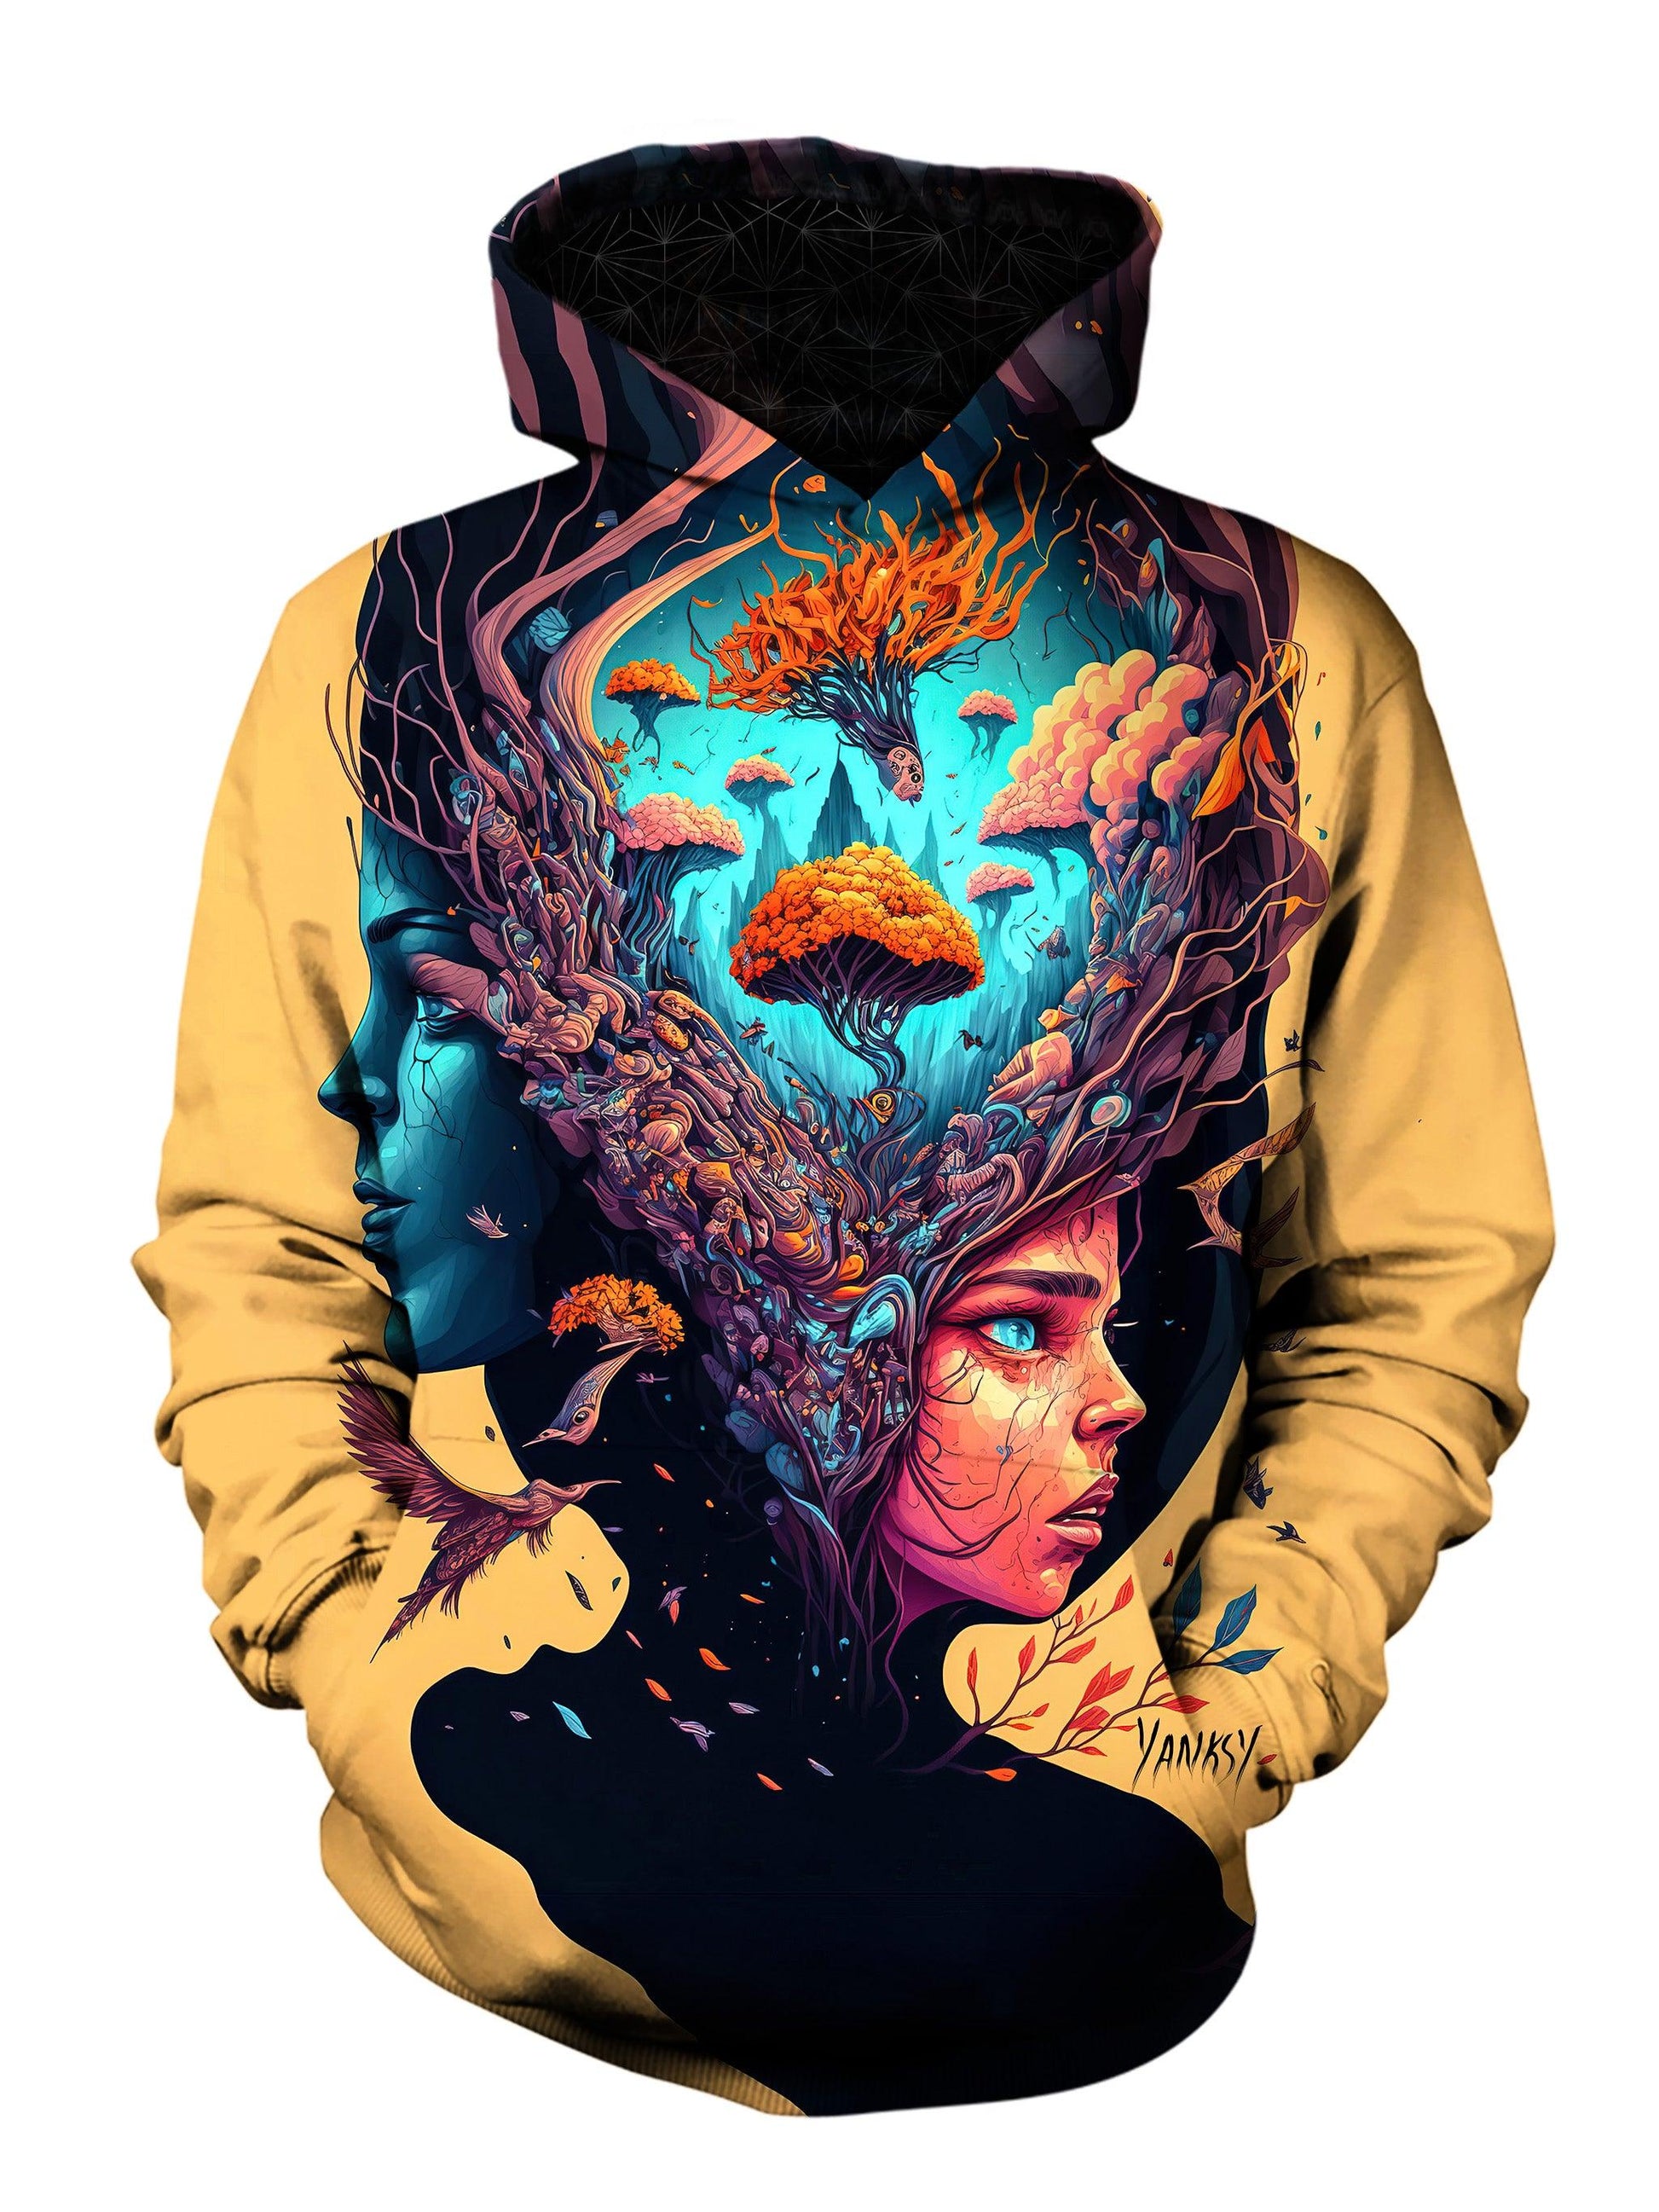 Embrace your inner artist with this one-of-a-kind trippy hoodie